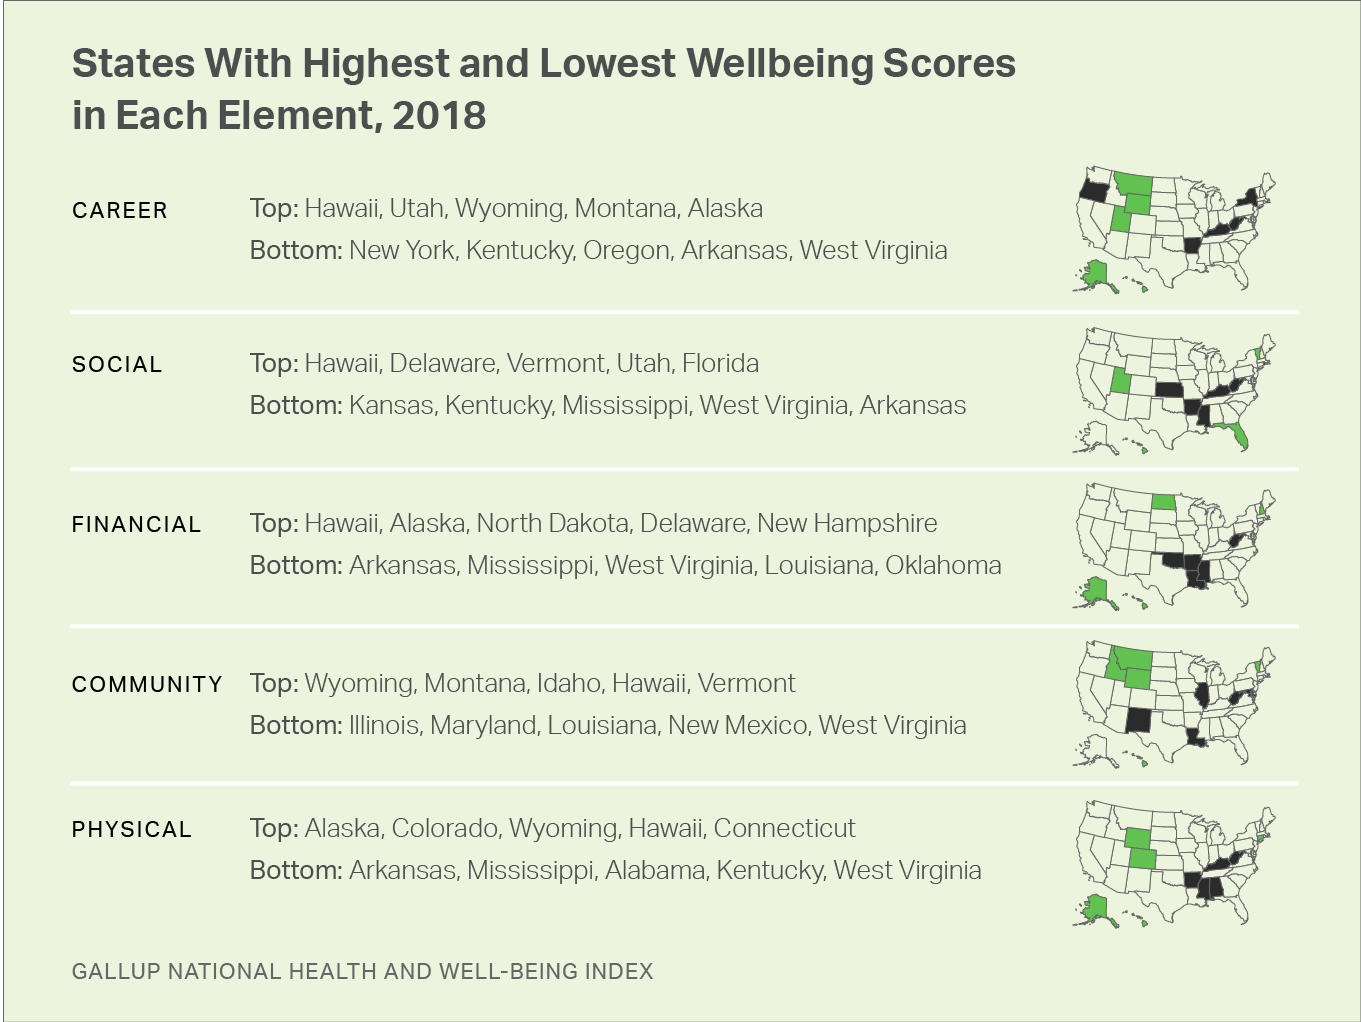 Heat maps. Maps detailing the highest- and lowest-scoring states for each of the five aspects of wellbeing.